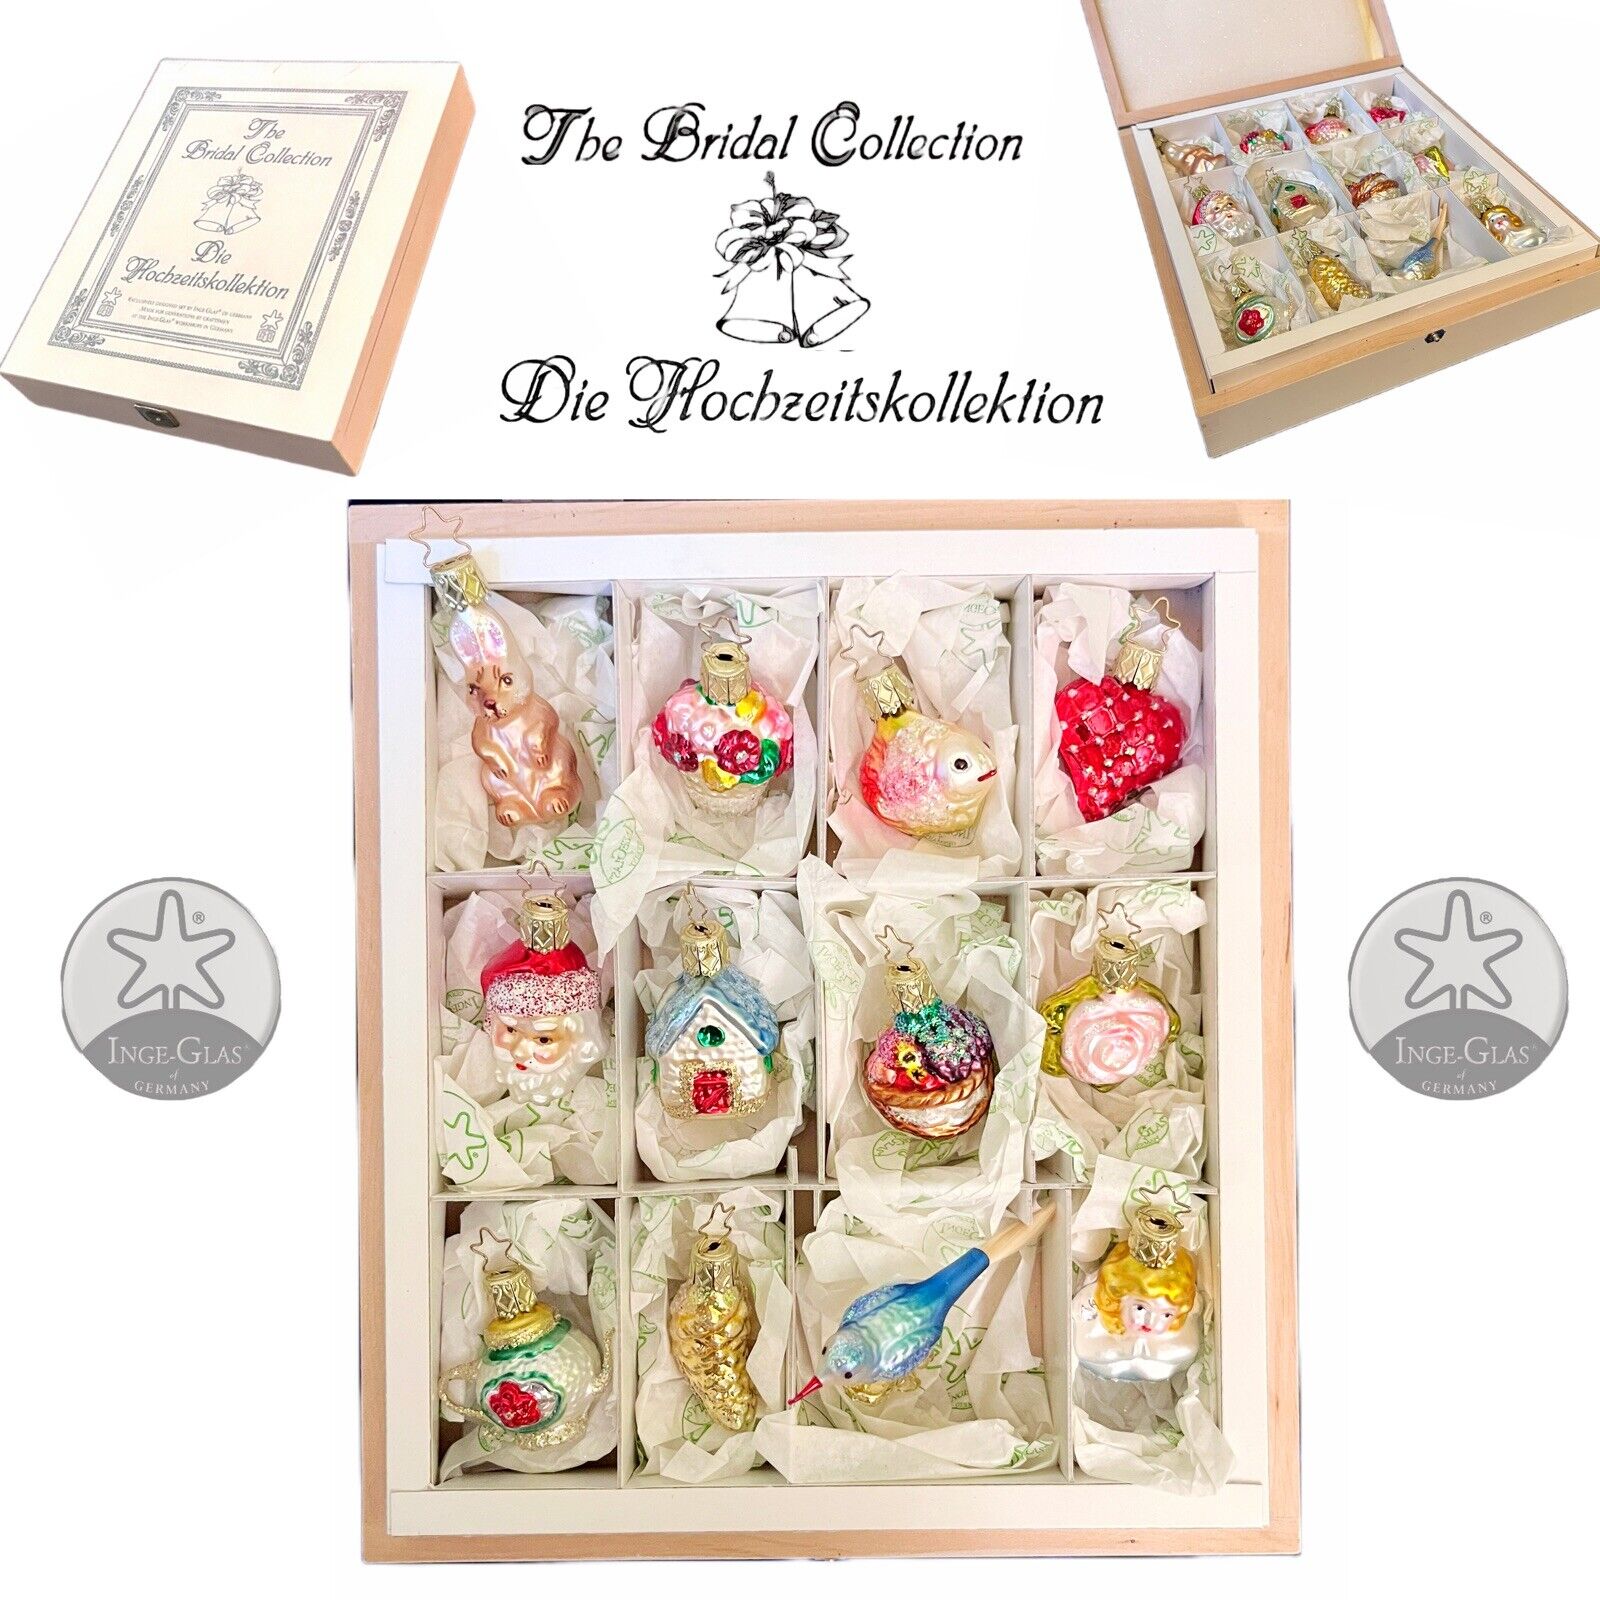 INGE-GLAS • The Bridal Collection • Christmas Ornaments • Wedding • Germany